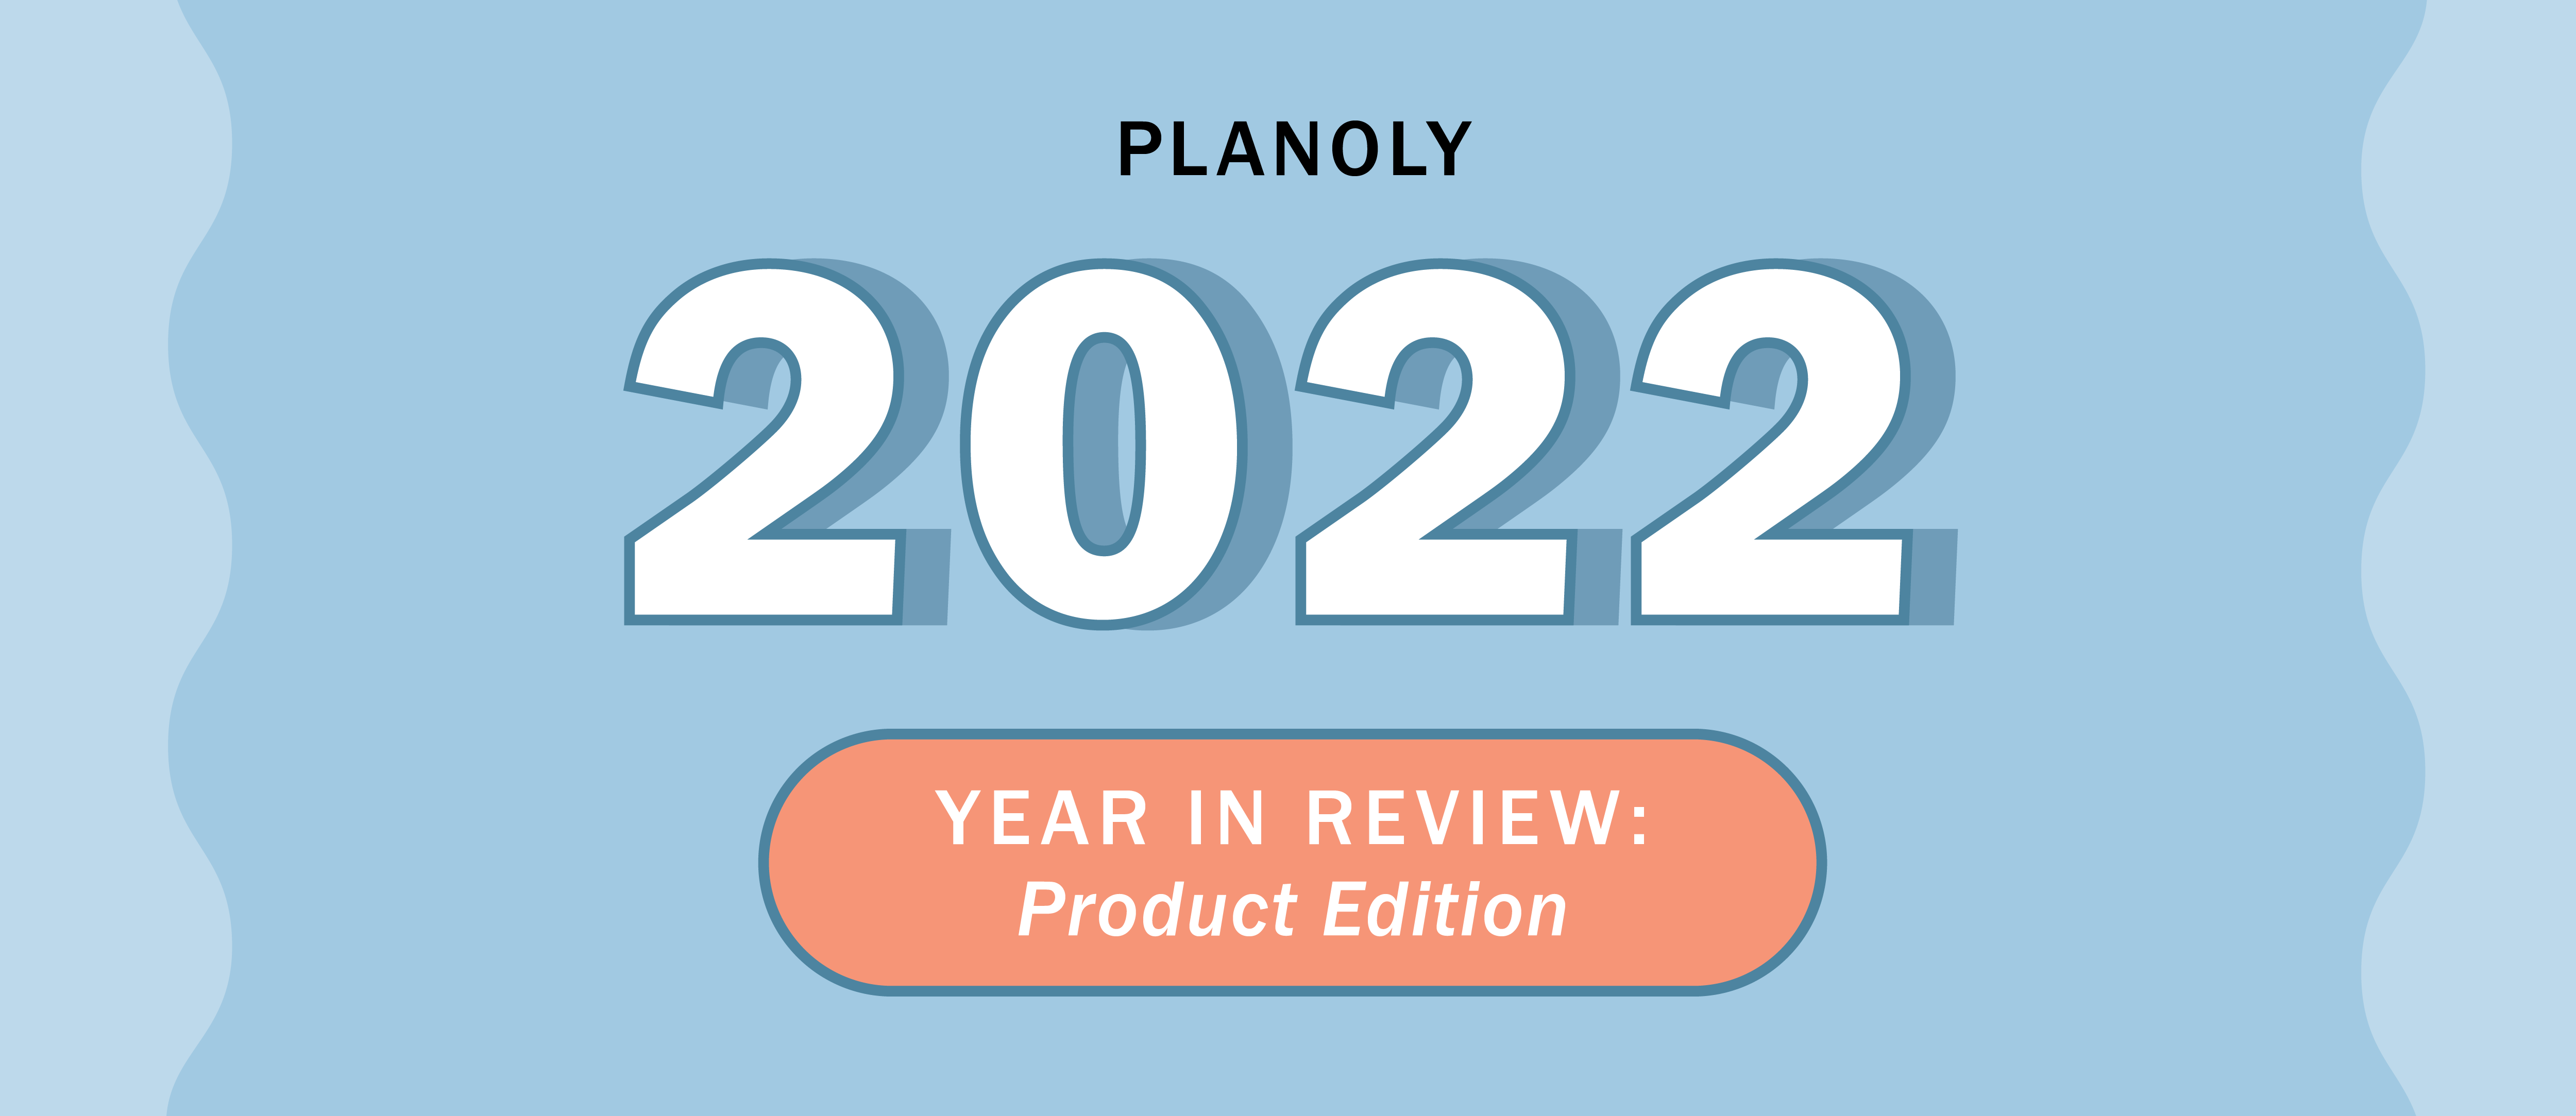 PLANOLY 2022 Year in Review: Product Edition